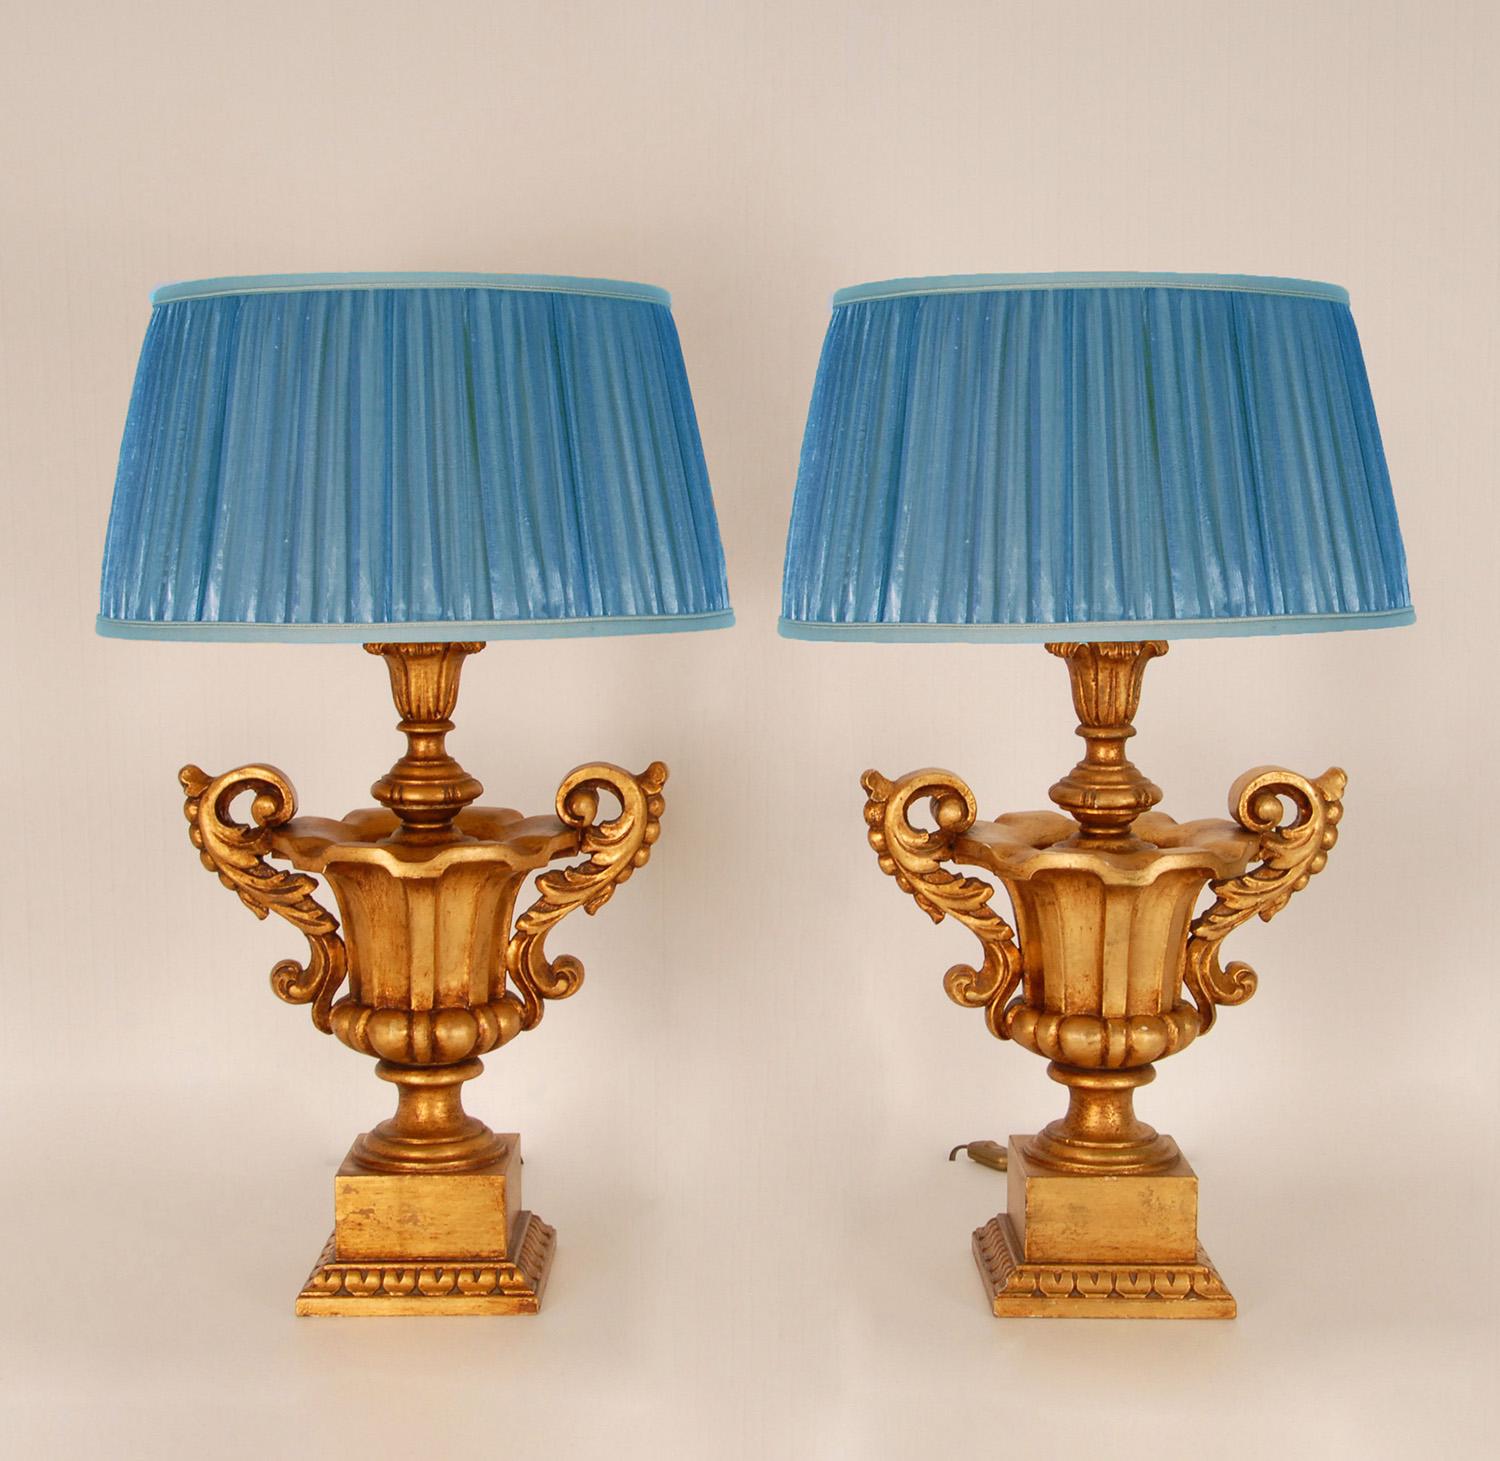 Vintage Italian Giltwood Lamps hand carved altar urn vases table lamps
Style: Vintage, Baroque, Antique, Mid Century, Neoclassical
Material: wood, gold leaf
Description: Beautifully gold giltwood Baroque style urns table lamps.
The vases with a